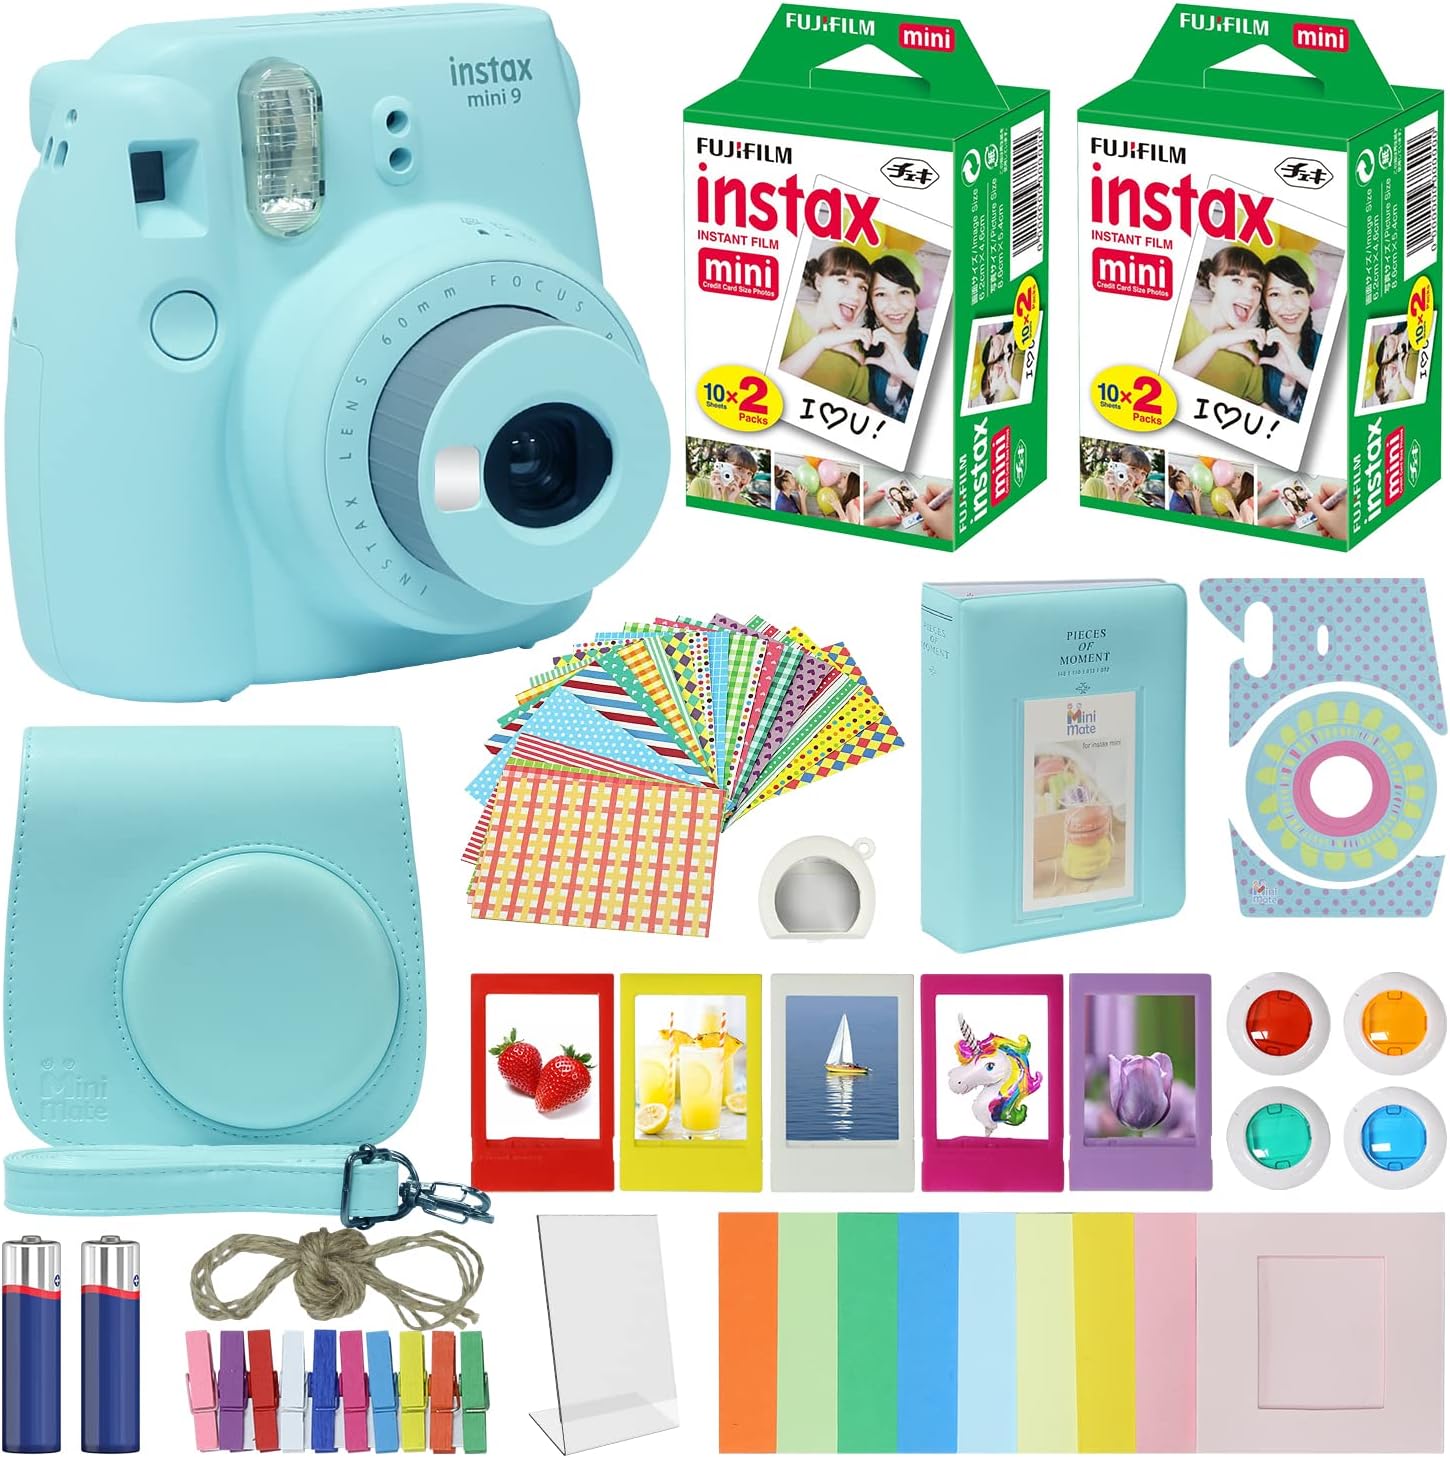 Fujifilm Instax Mini 9 Instant Camera Ice Blue with Carrying Case + Fuji Instax Film Value Pack (40 Sheets) Accessories Bundle, Color Filters, Photo Album, Assorted Frames, Selfie Lens + More